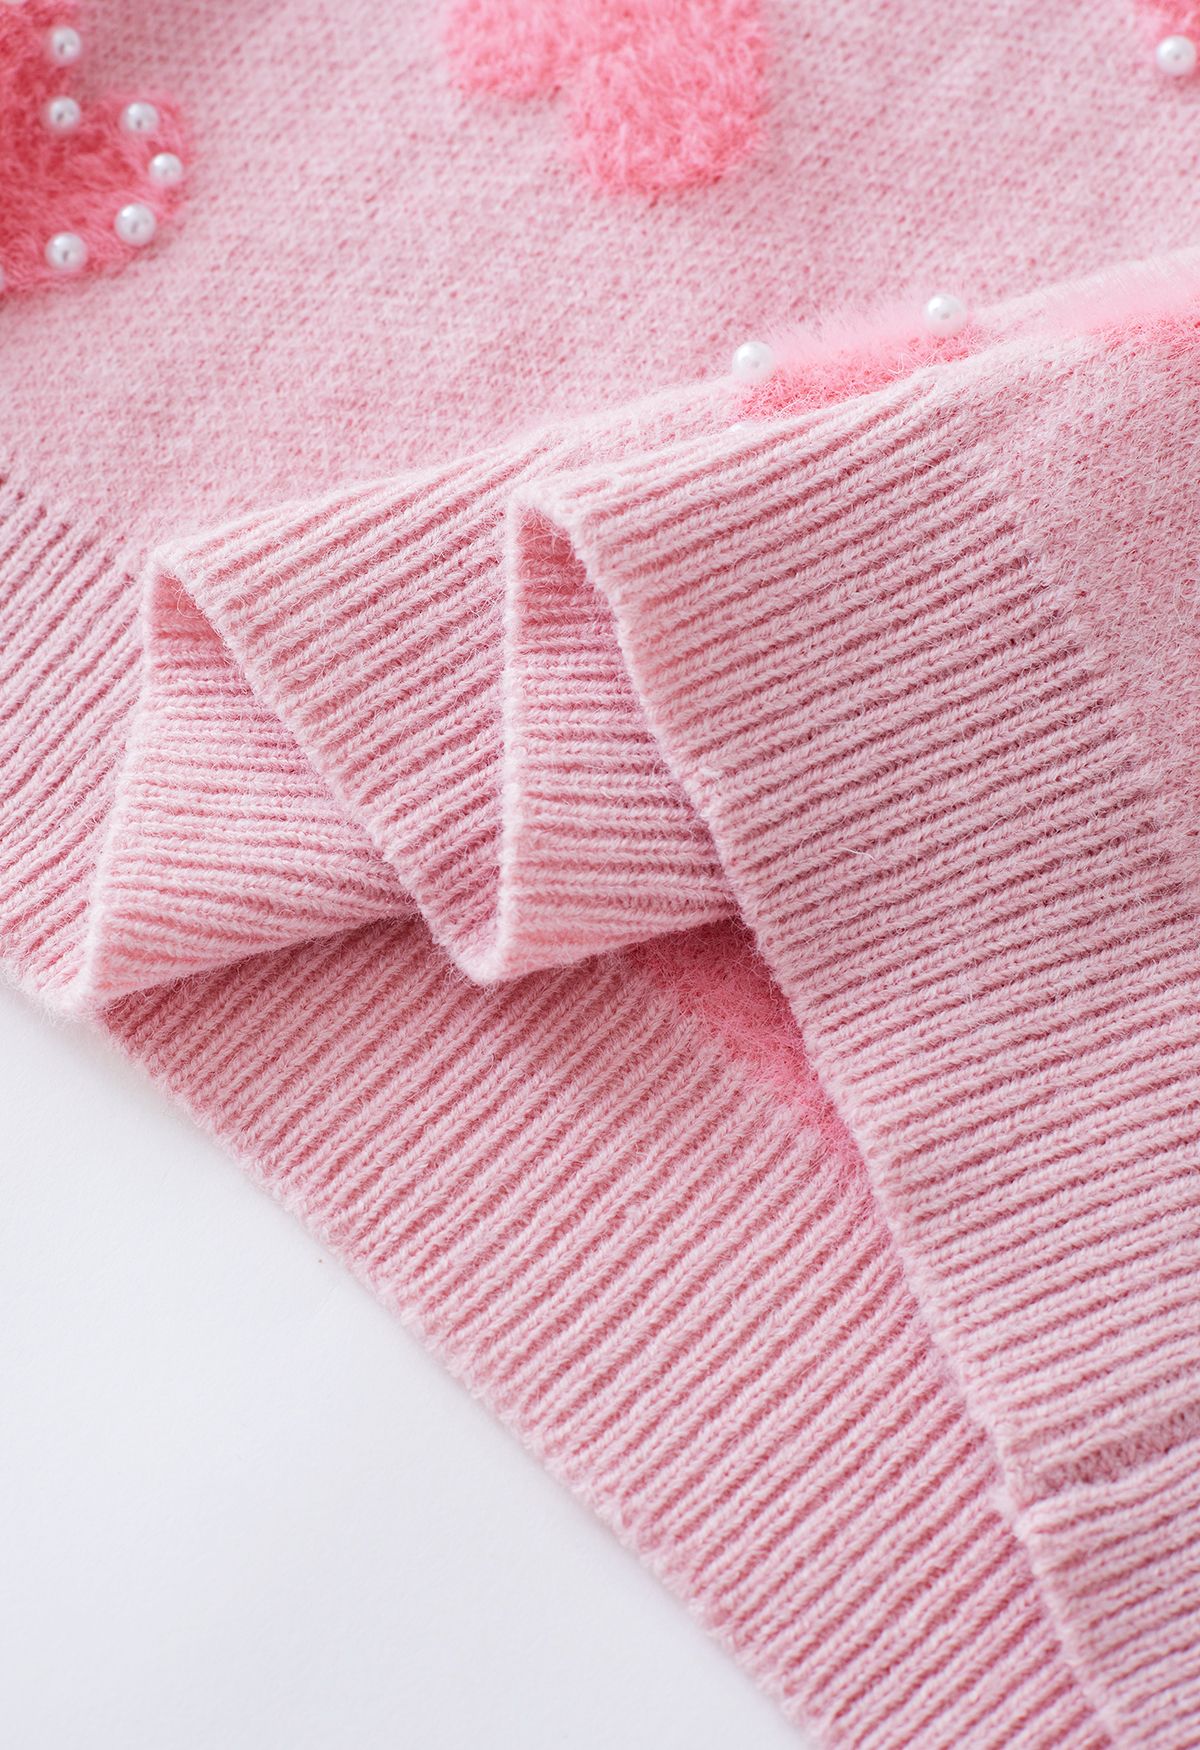 Pearl Trim Fluffy Heart Knit Sweater in Pink